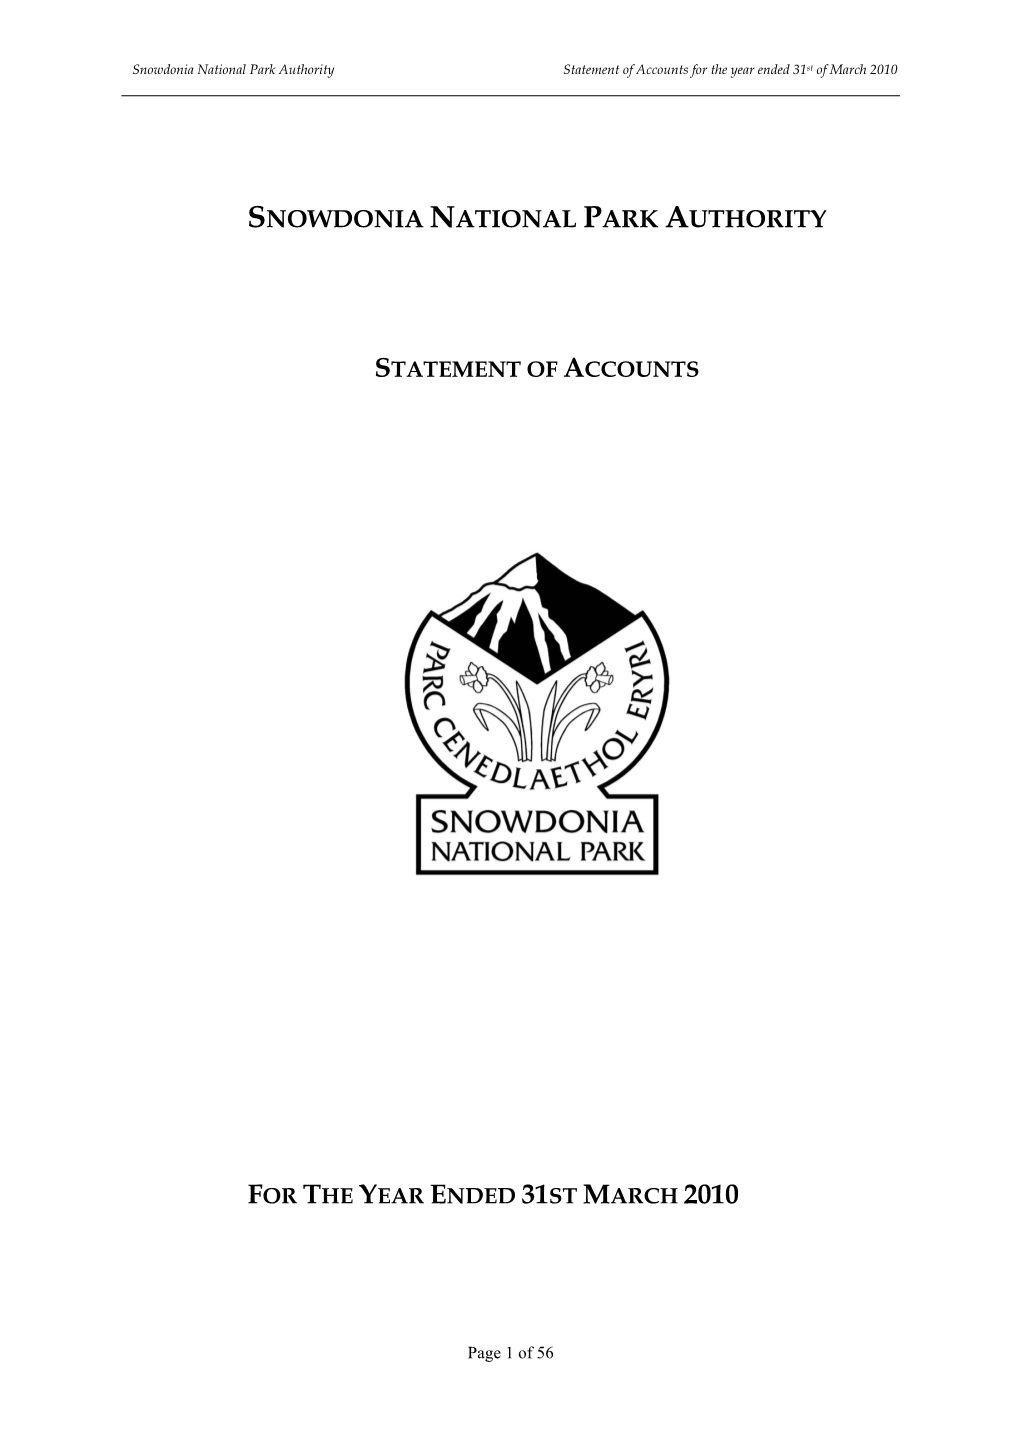 Snowdonia National Park Authority Statement of Accounts for the Year Ended 31St of March 2010